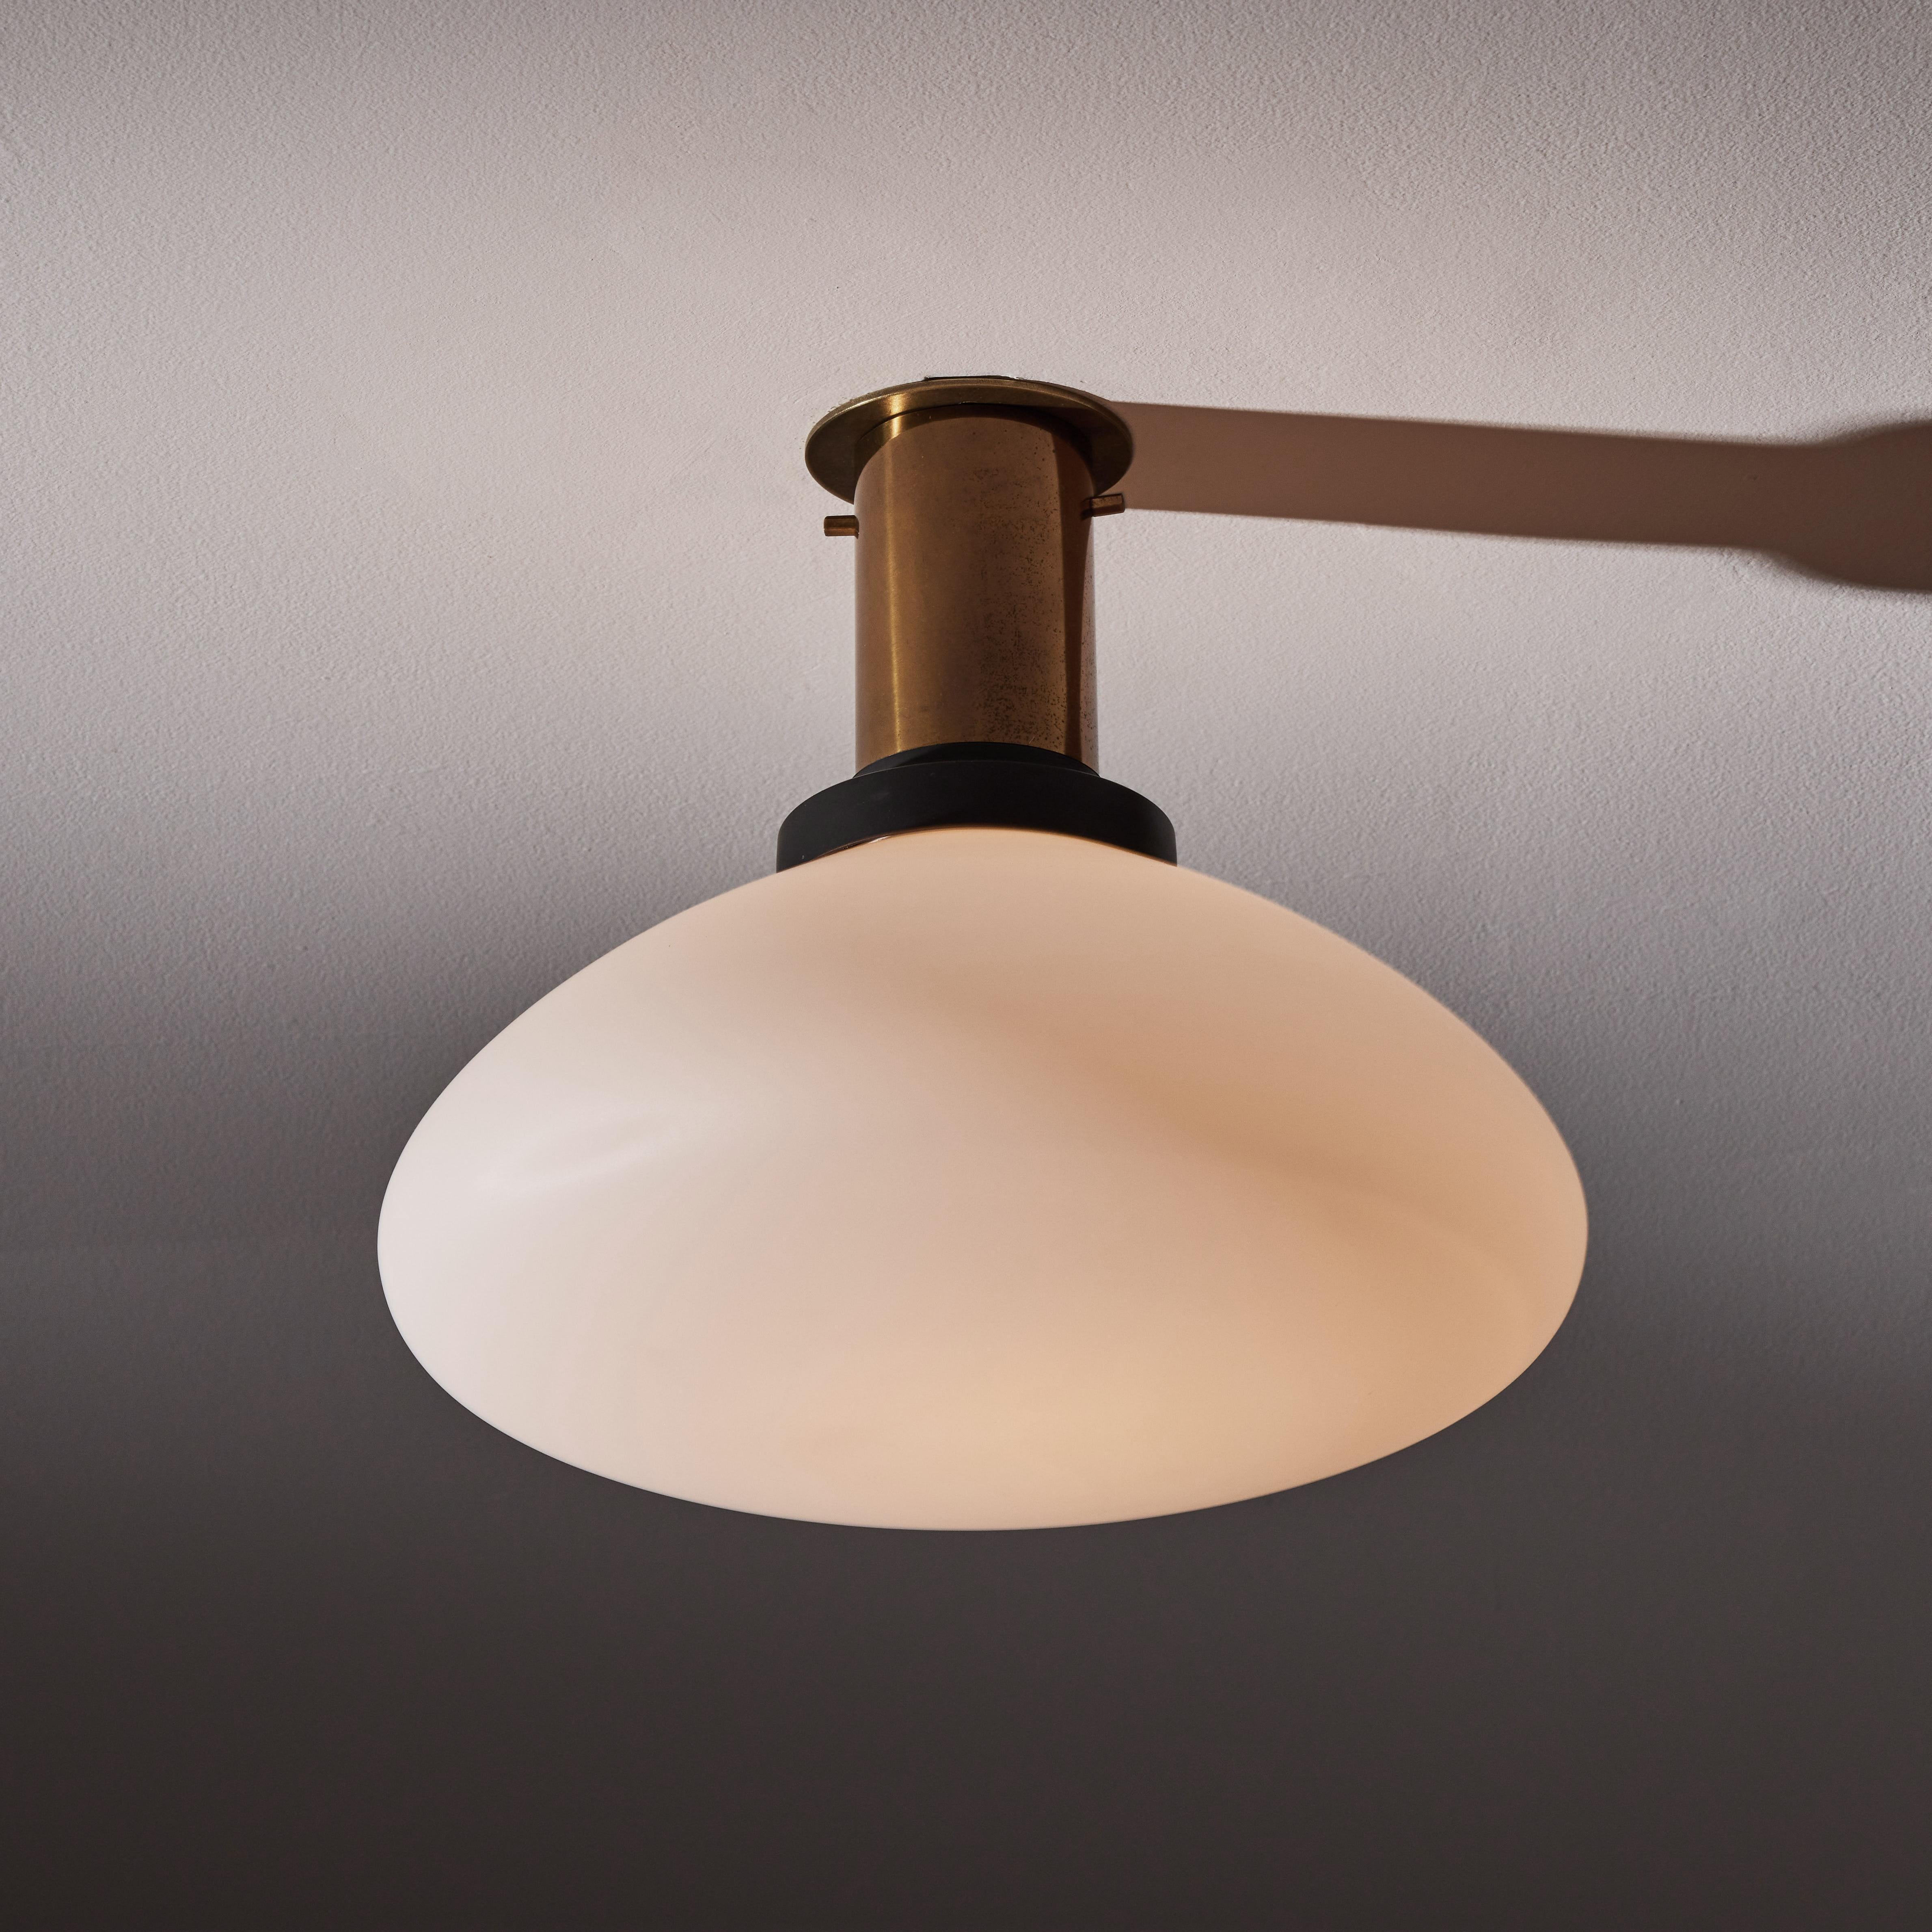 Flush mount ceiling light by Stilnovo. Manufactured in Italy, circa 1960's. Brushed satin glass diffuser, brass, enameled metal. Custom brass backplate. Wired for U.S. standards. We recommend one E27 60w maximum bulb. Bulb provided as a one time